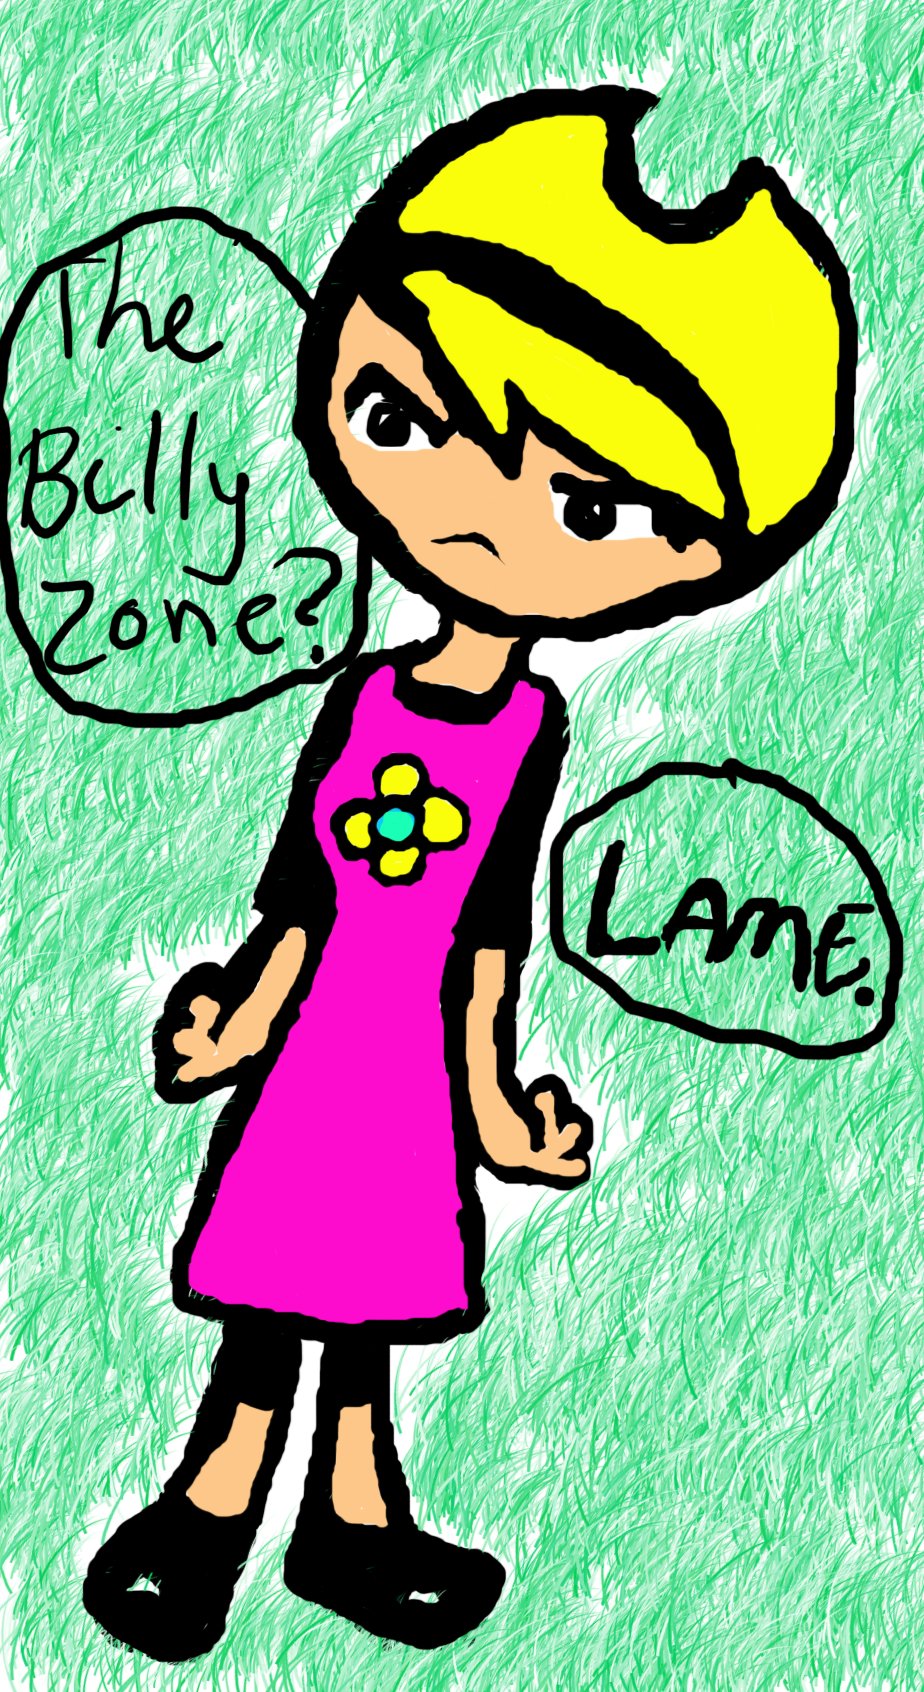 The billy zone by TooLittleTooLate